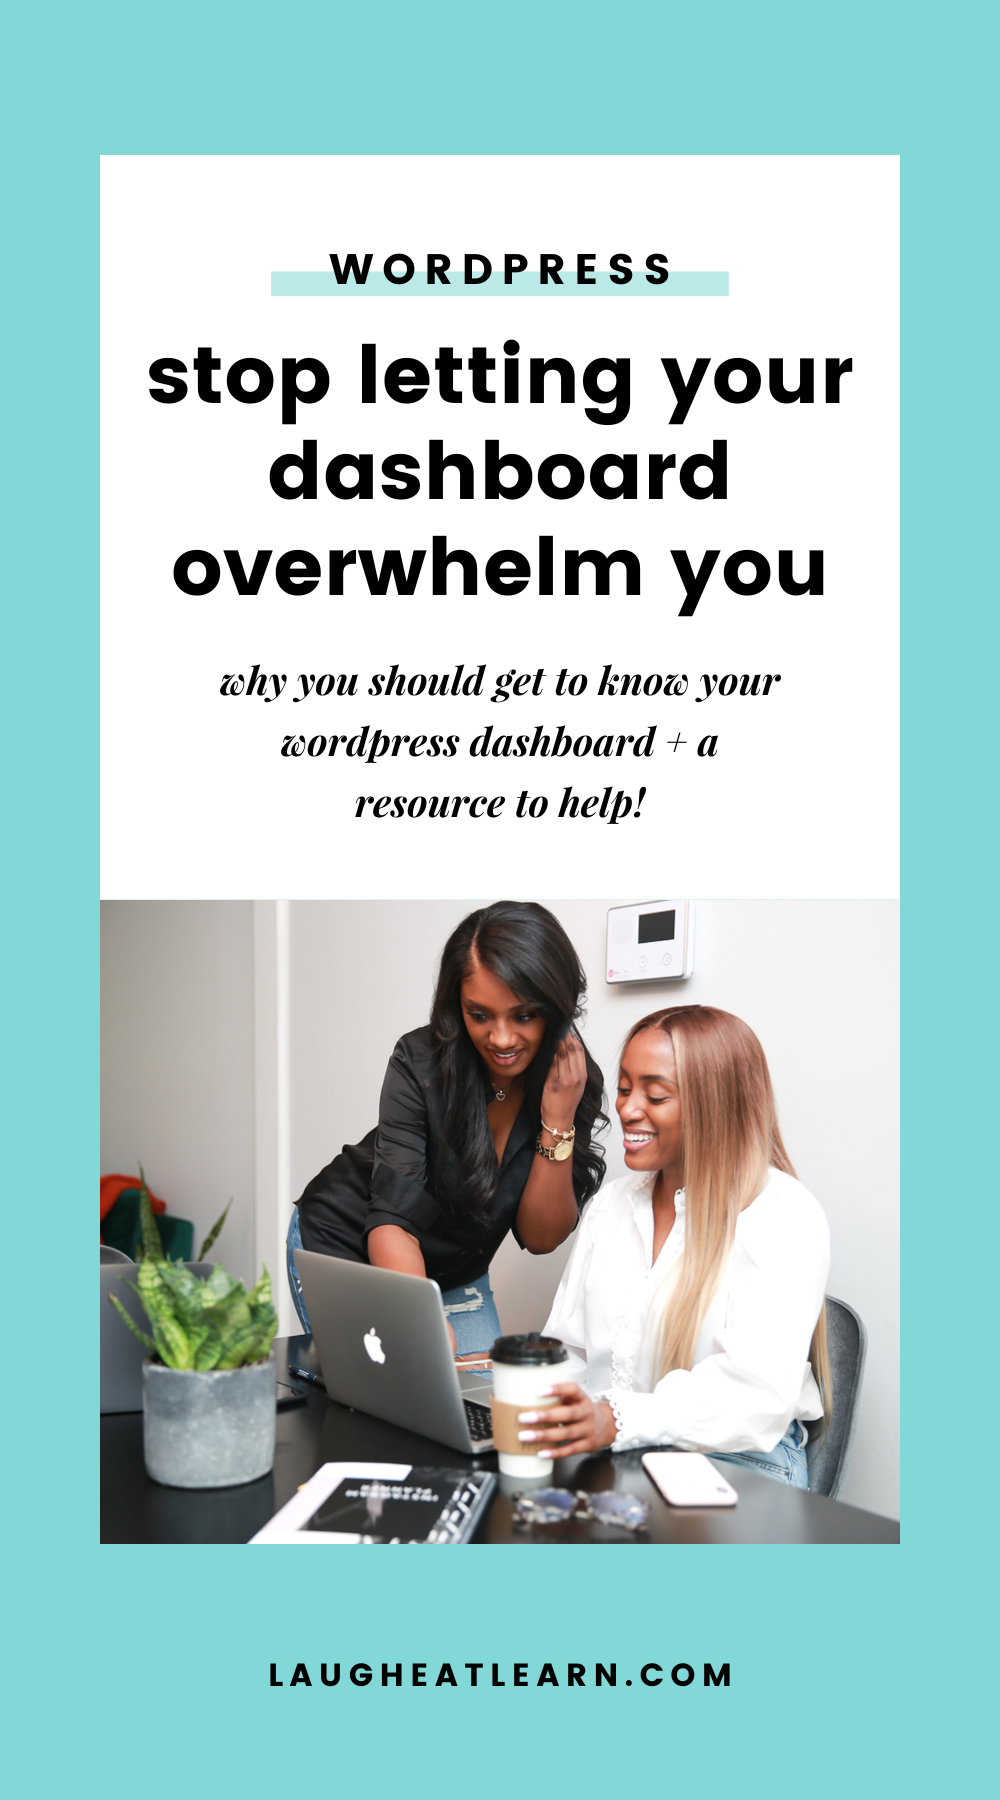 If you are used to ignoring your WordPress dashboard, then we need to chat! Here are three reasons you need to understand you dashboard.